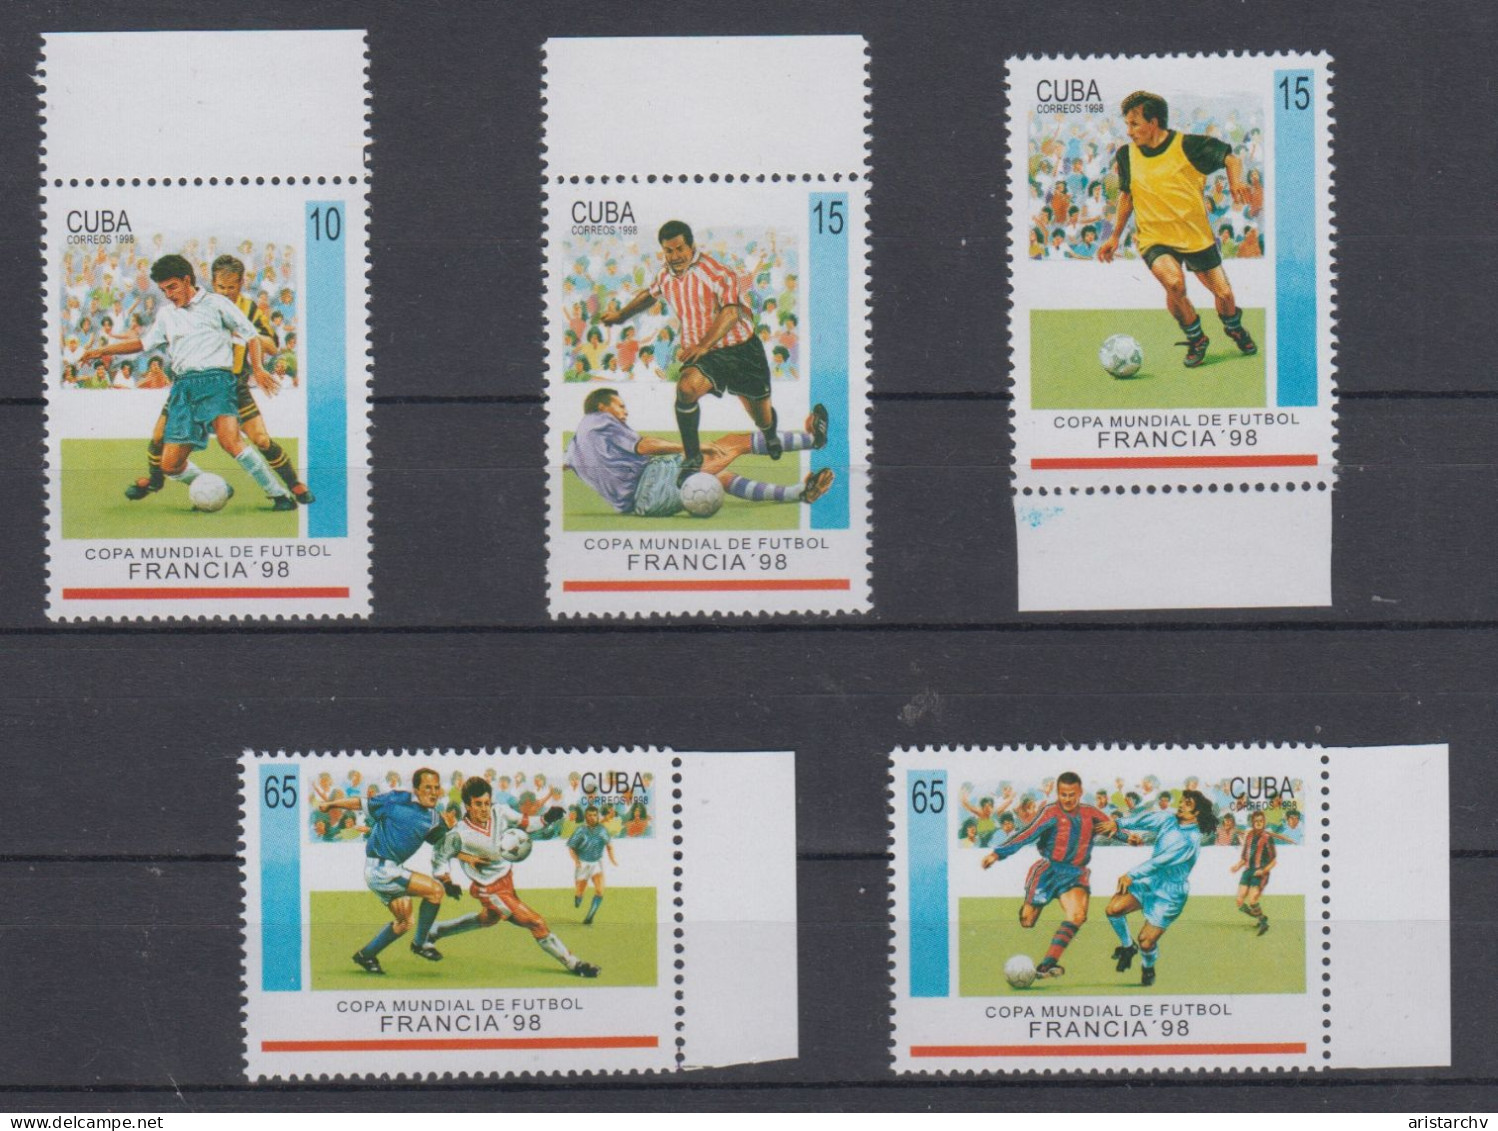 CUBA 1998 FOOTBALL WORLD CUP S/SHEET AND 5 STAMPS - 1998 – France